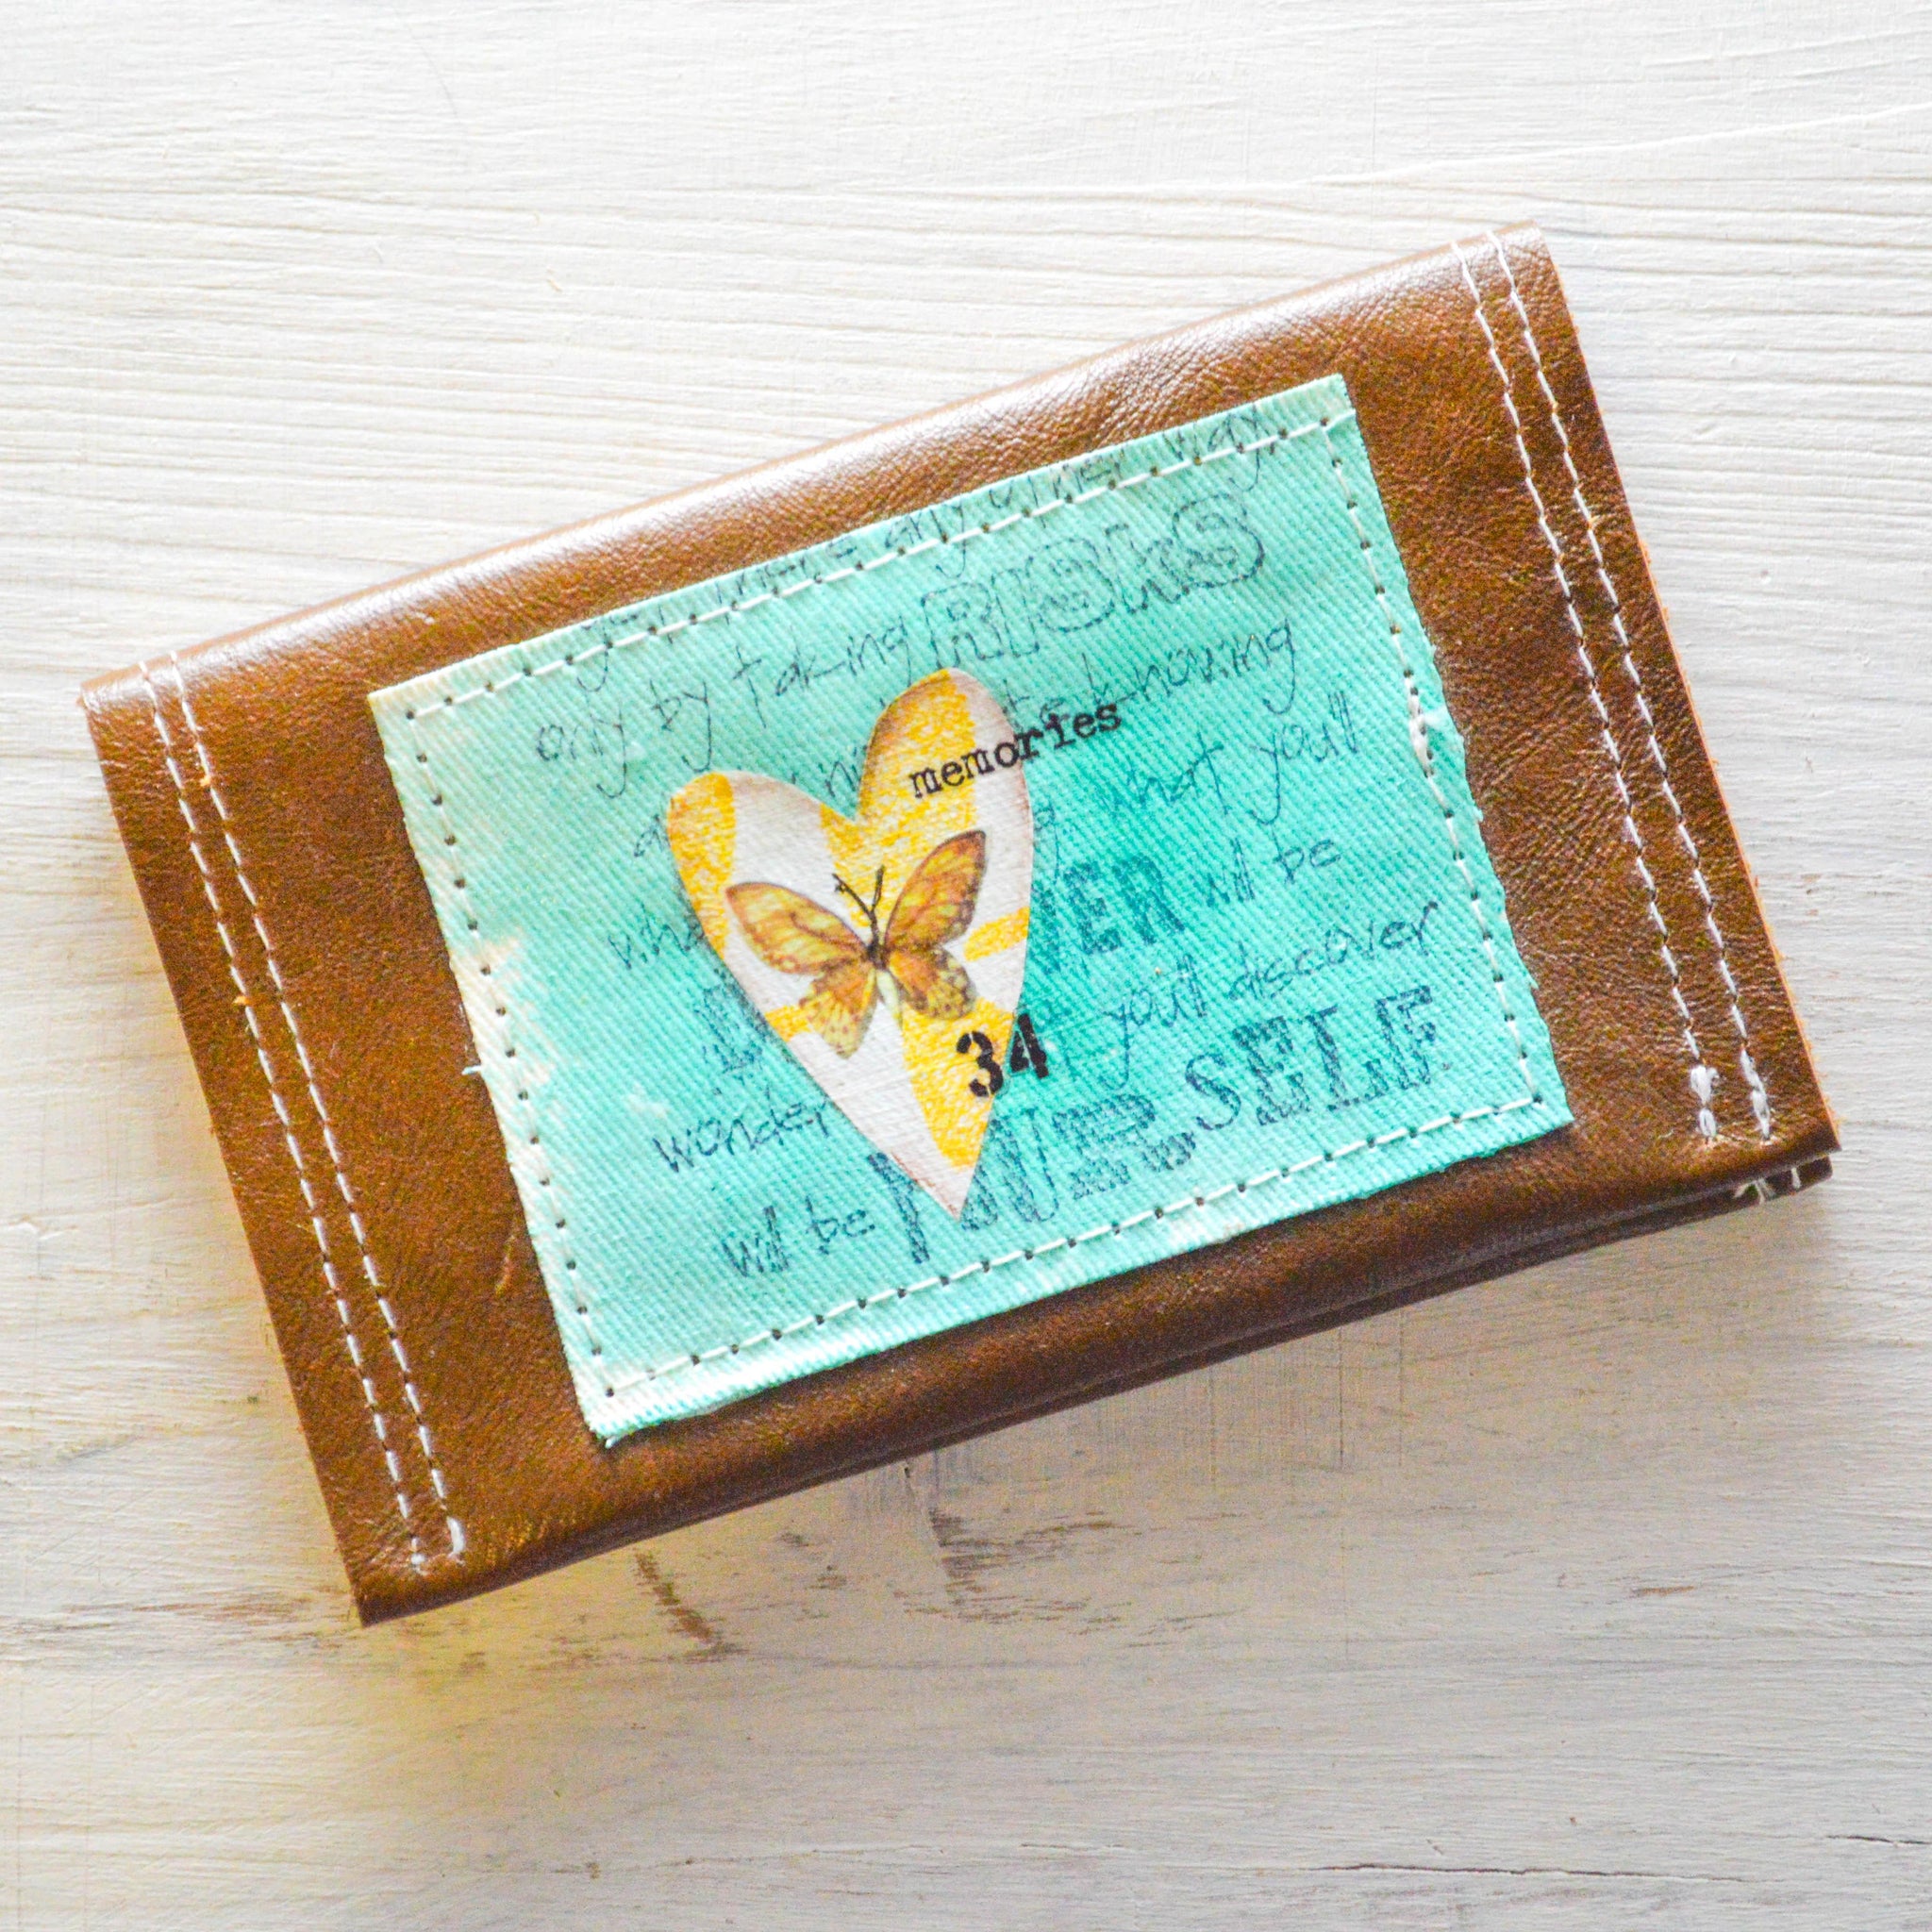 Leather Business or Credit Card Holder Uni-T